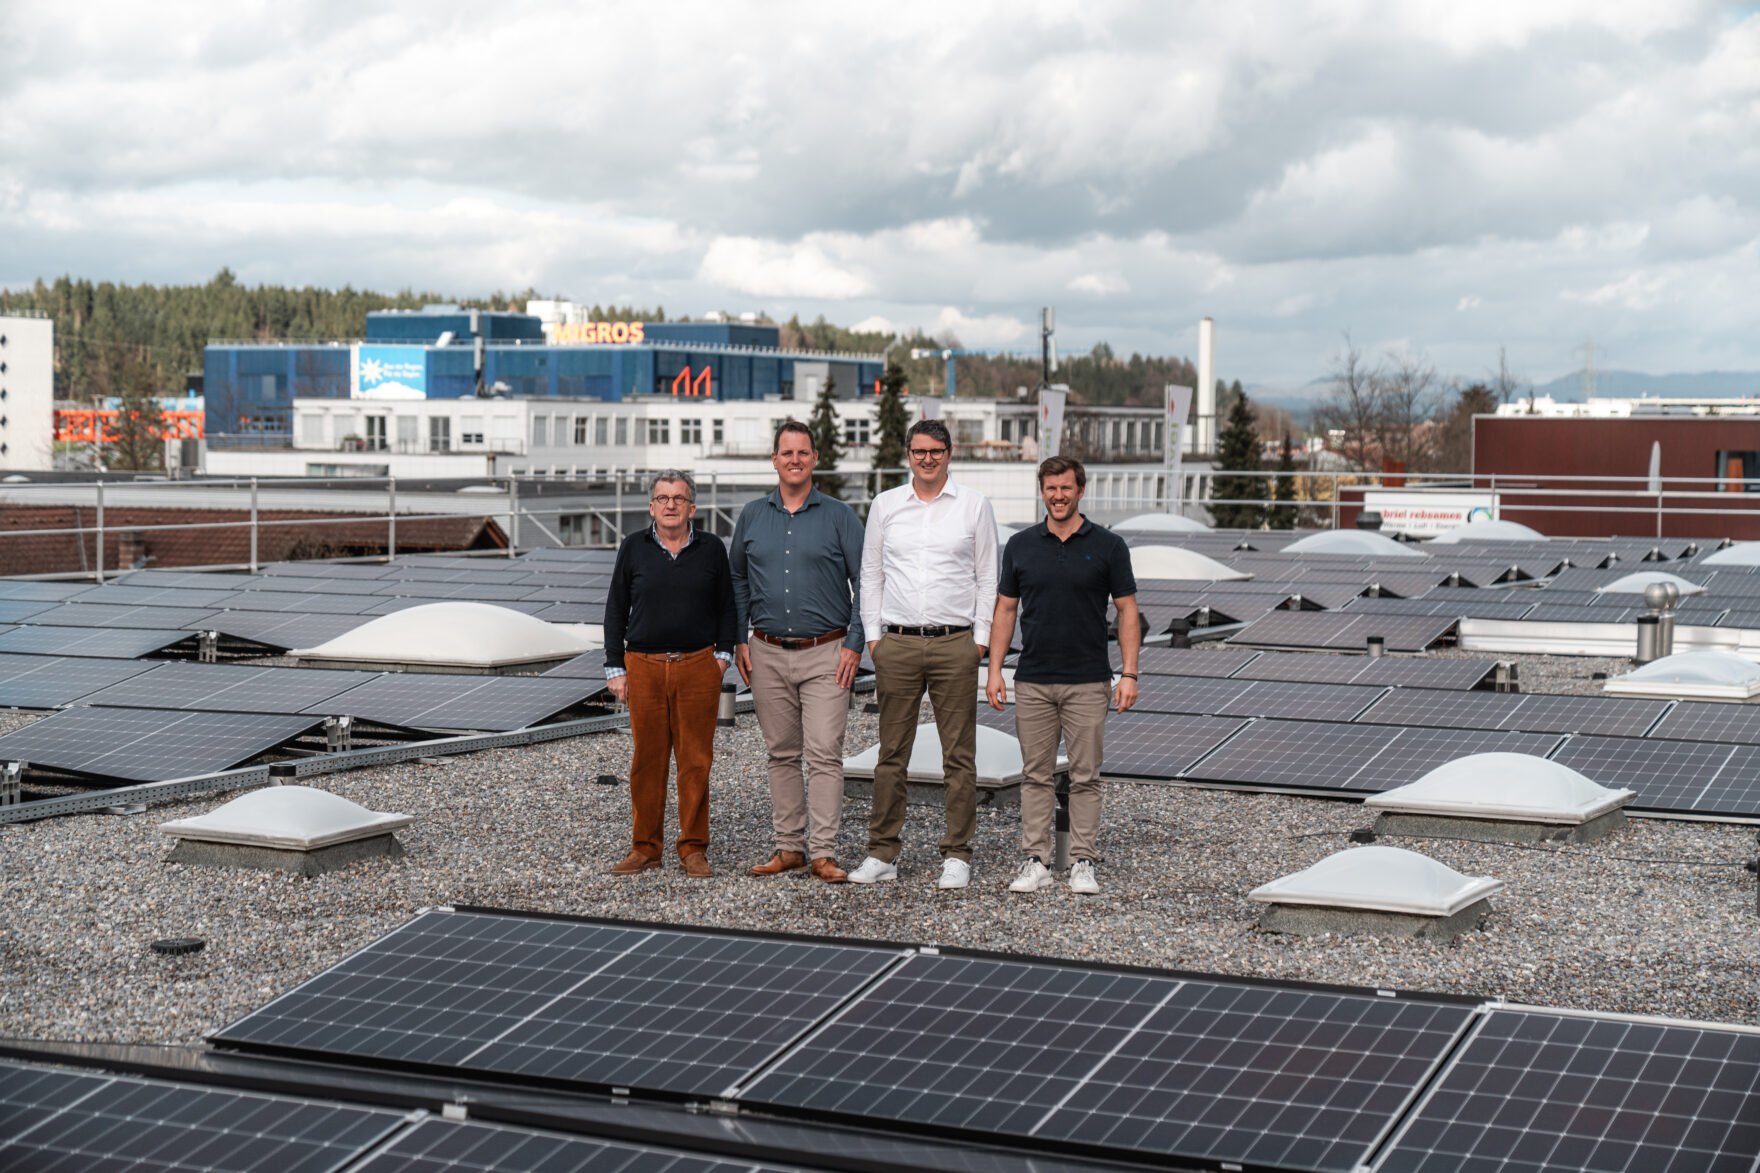 We are focusing on sustainability with a new photovoltaic system